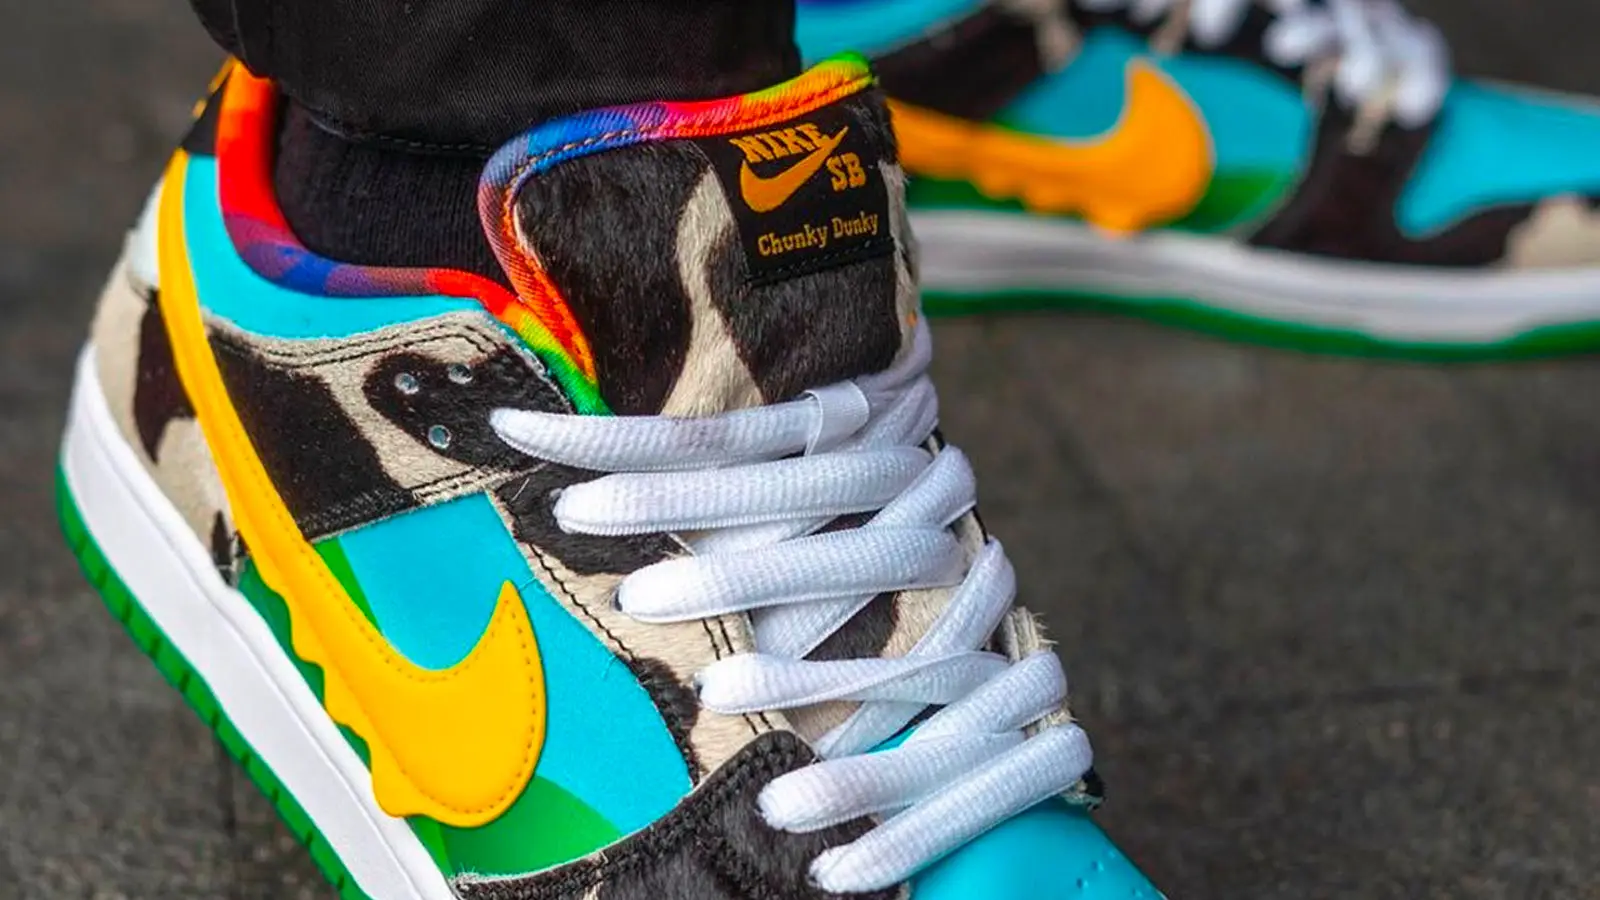 Get an On-Foot Look at the Ben & Jerry's x Nike SB Dunk Low 